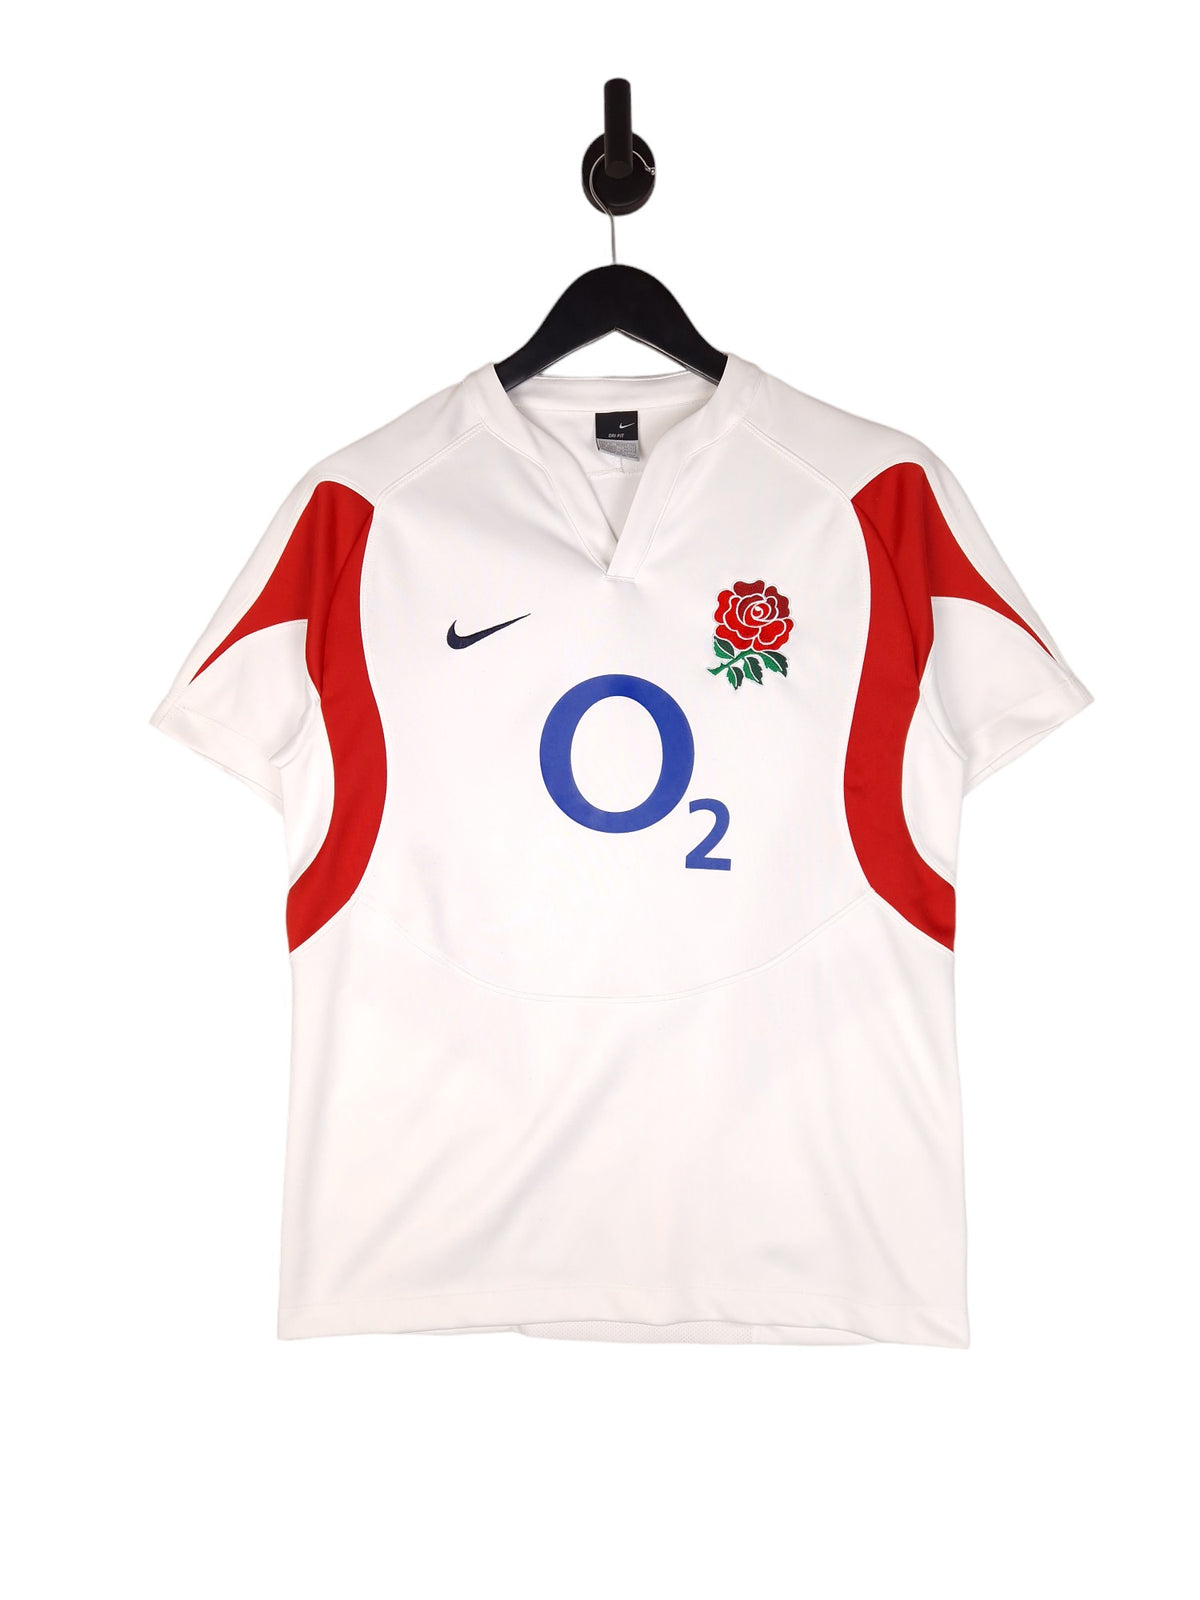 Nike England Rugby Union Home Jersey 05/06 - Size Medium